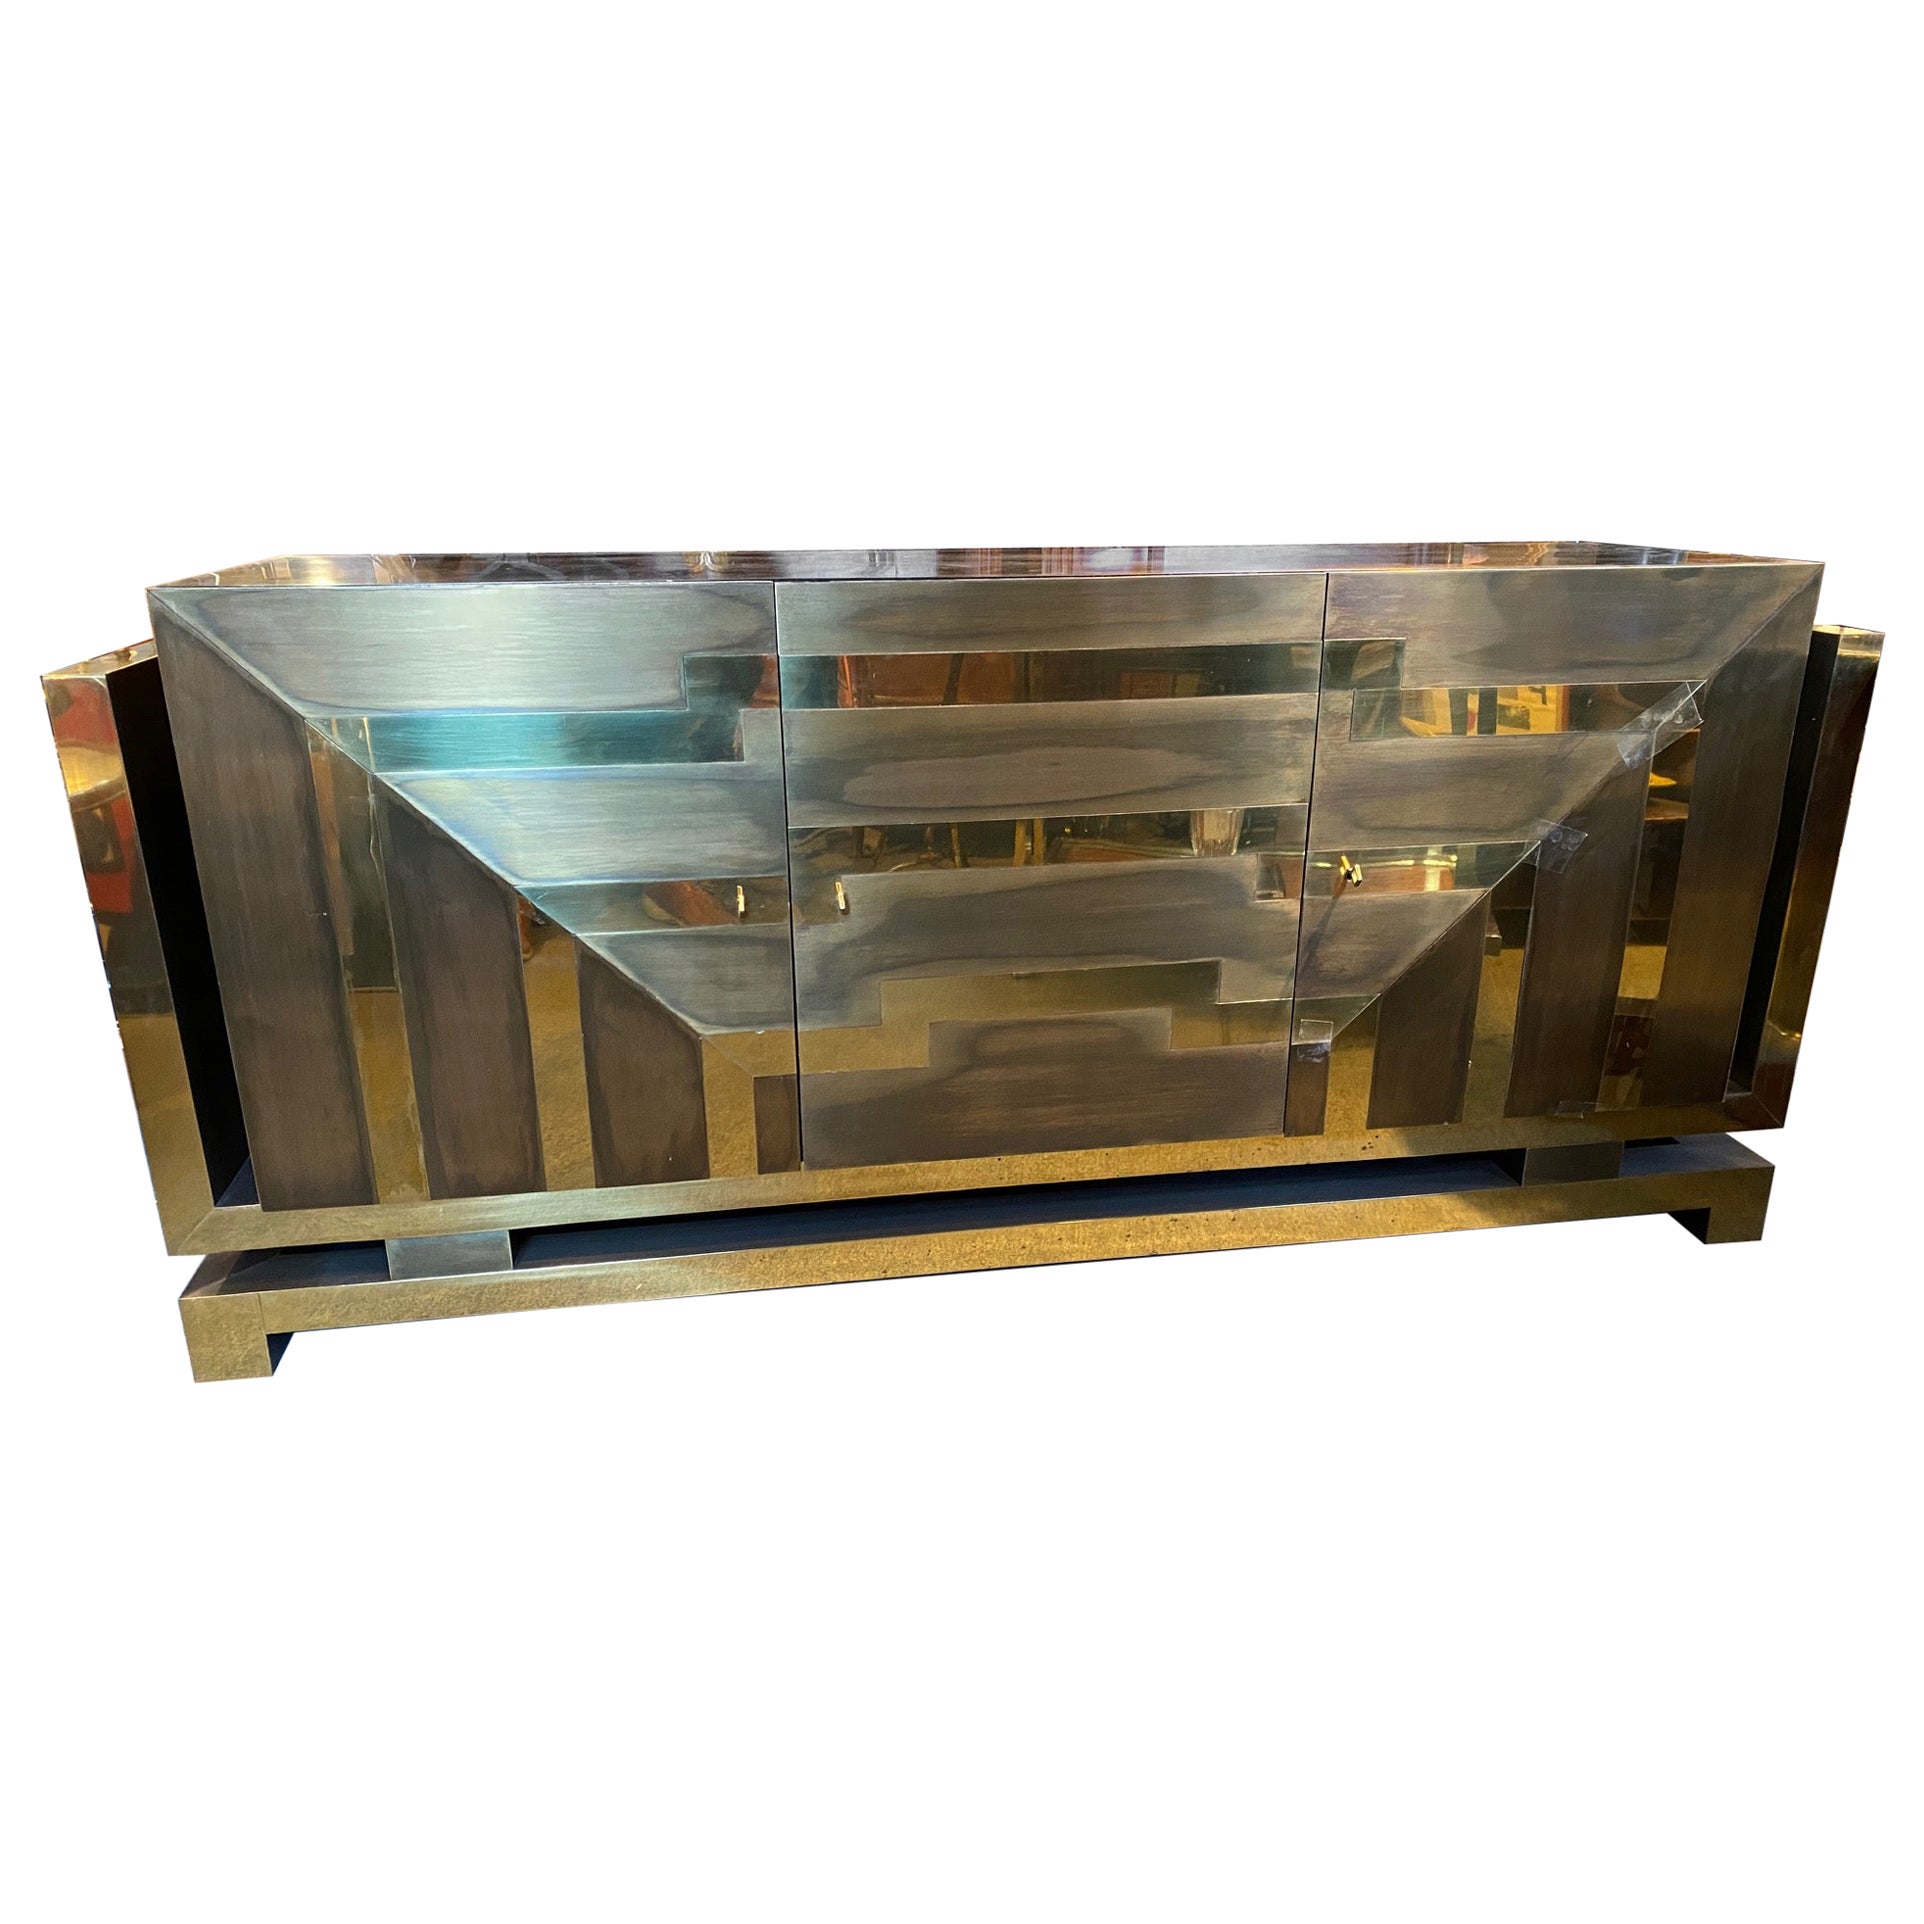 Modernist Polished and Patinated Brass Credenza